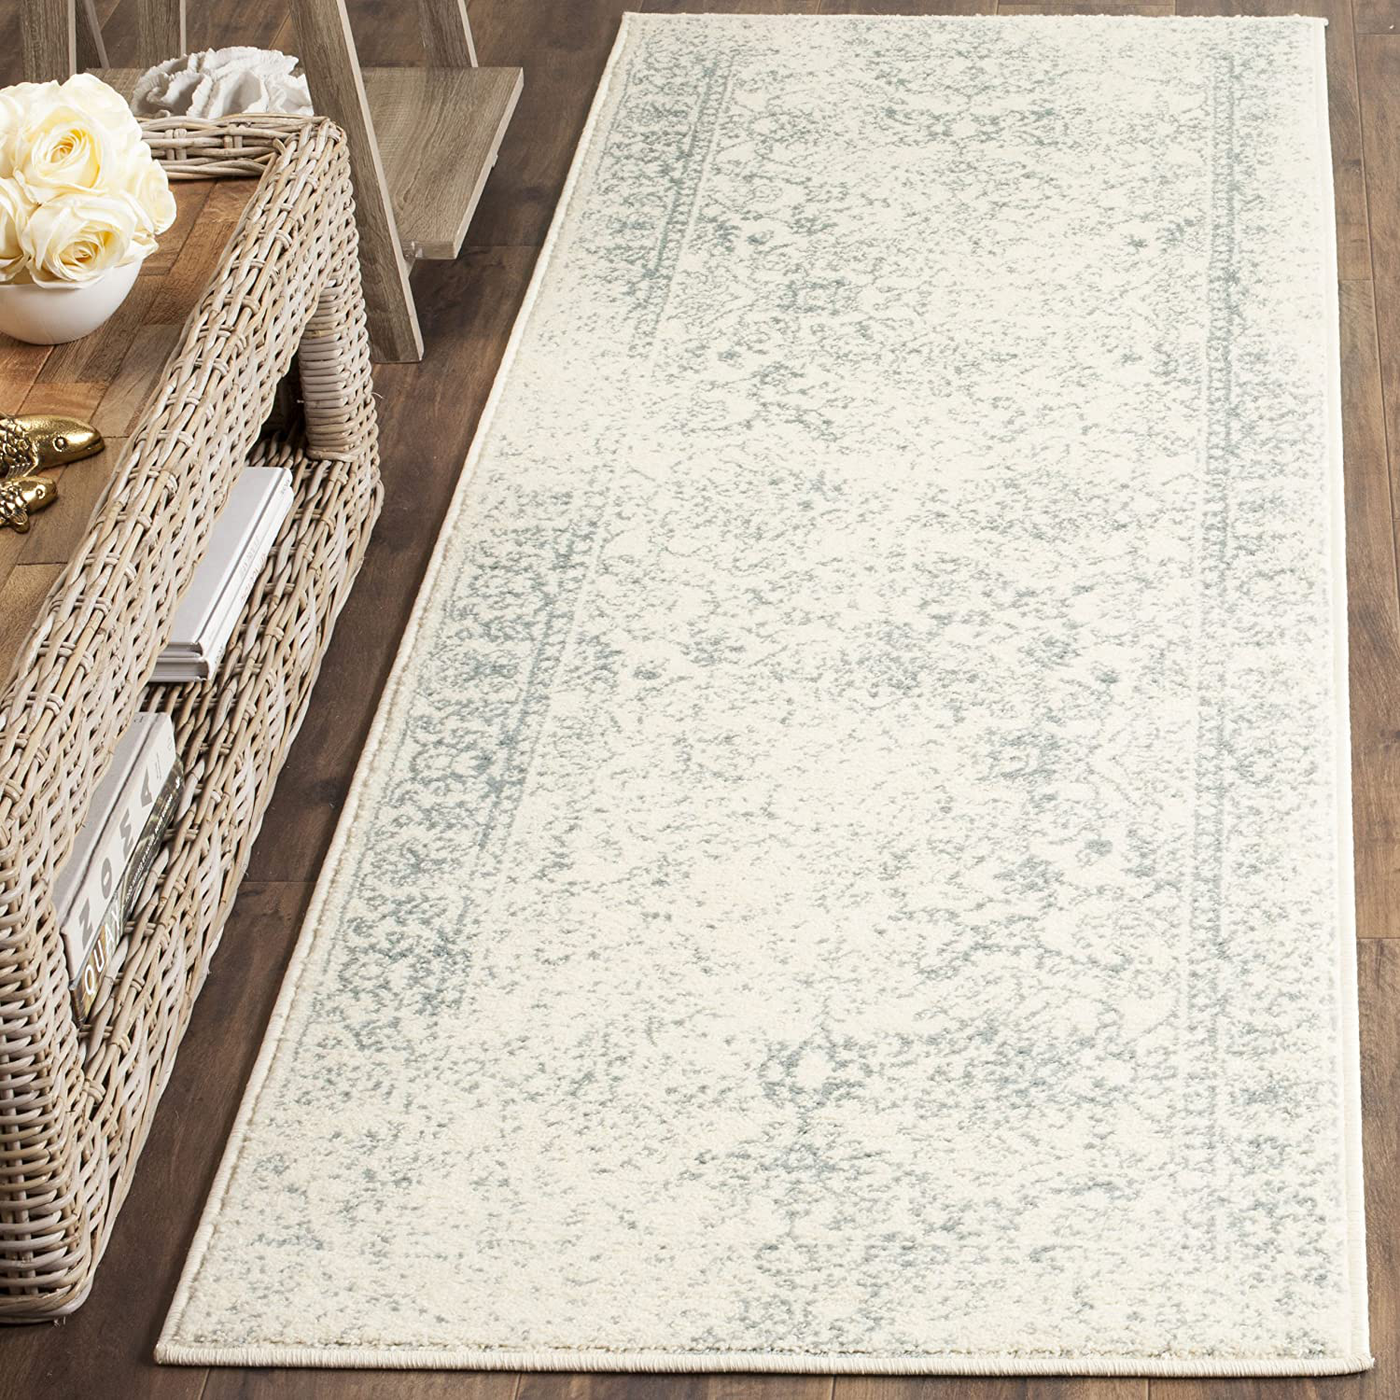 Safavieh Adirondack Collection ADR109S Oriental Distressed Non-Shedding Stain Resistant Living Room Bedroom Runner, 2'6" x 8' , Ivory / Slate